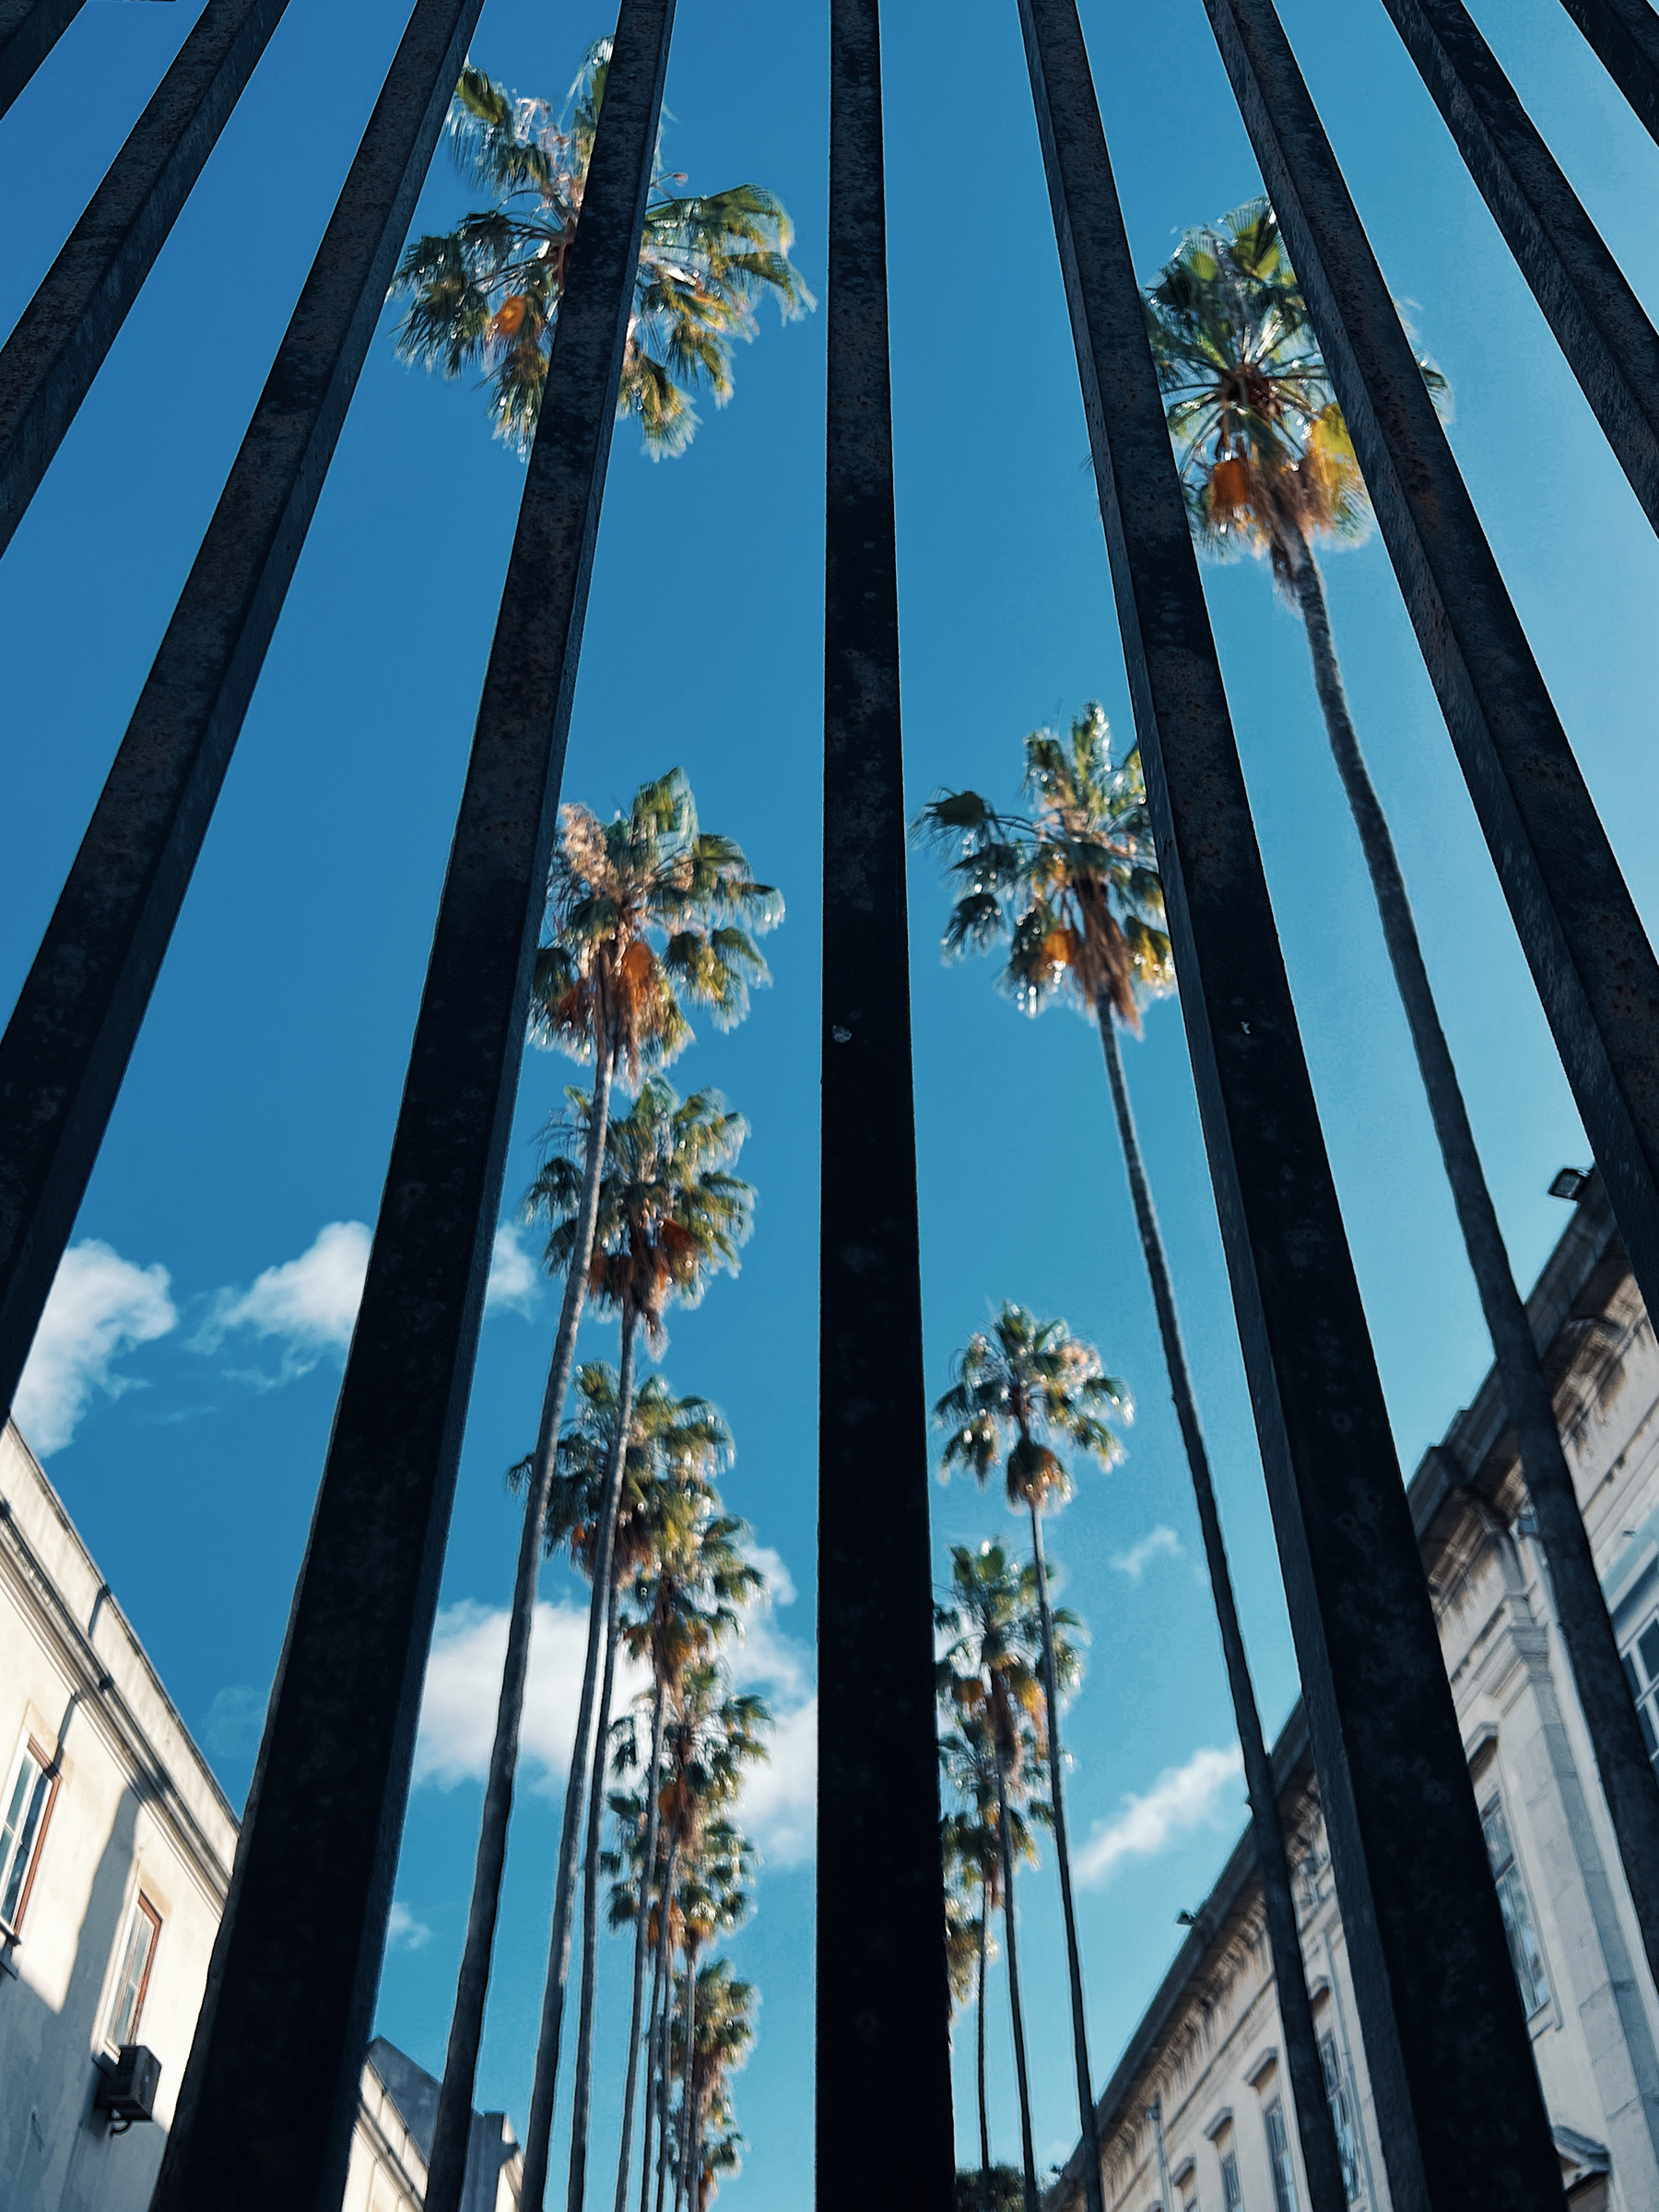 Palm trees behind bars, and a blue sky. 